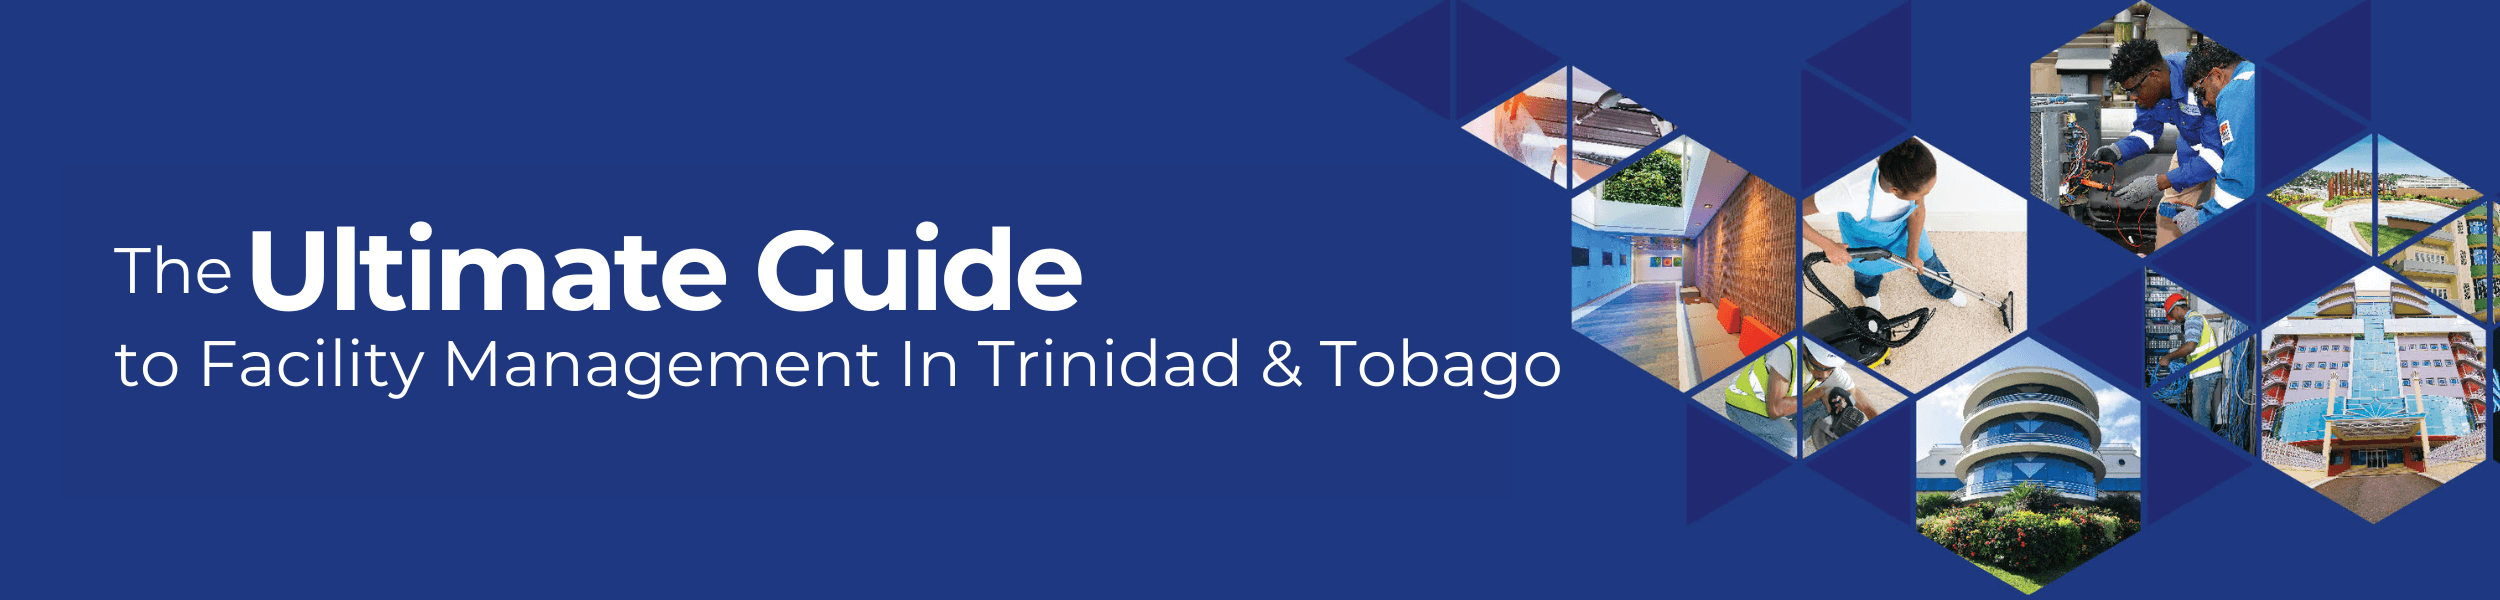 Blue banner for the Ultimate Guide to Facility Management in Trinidad and Tobago